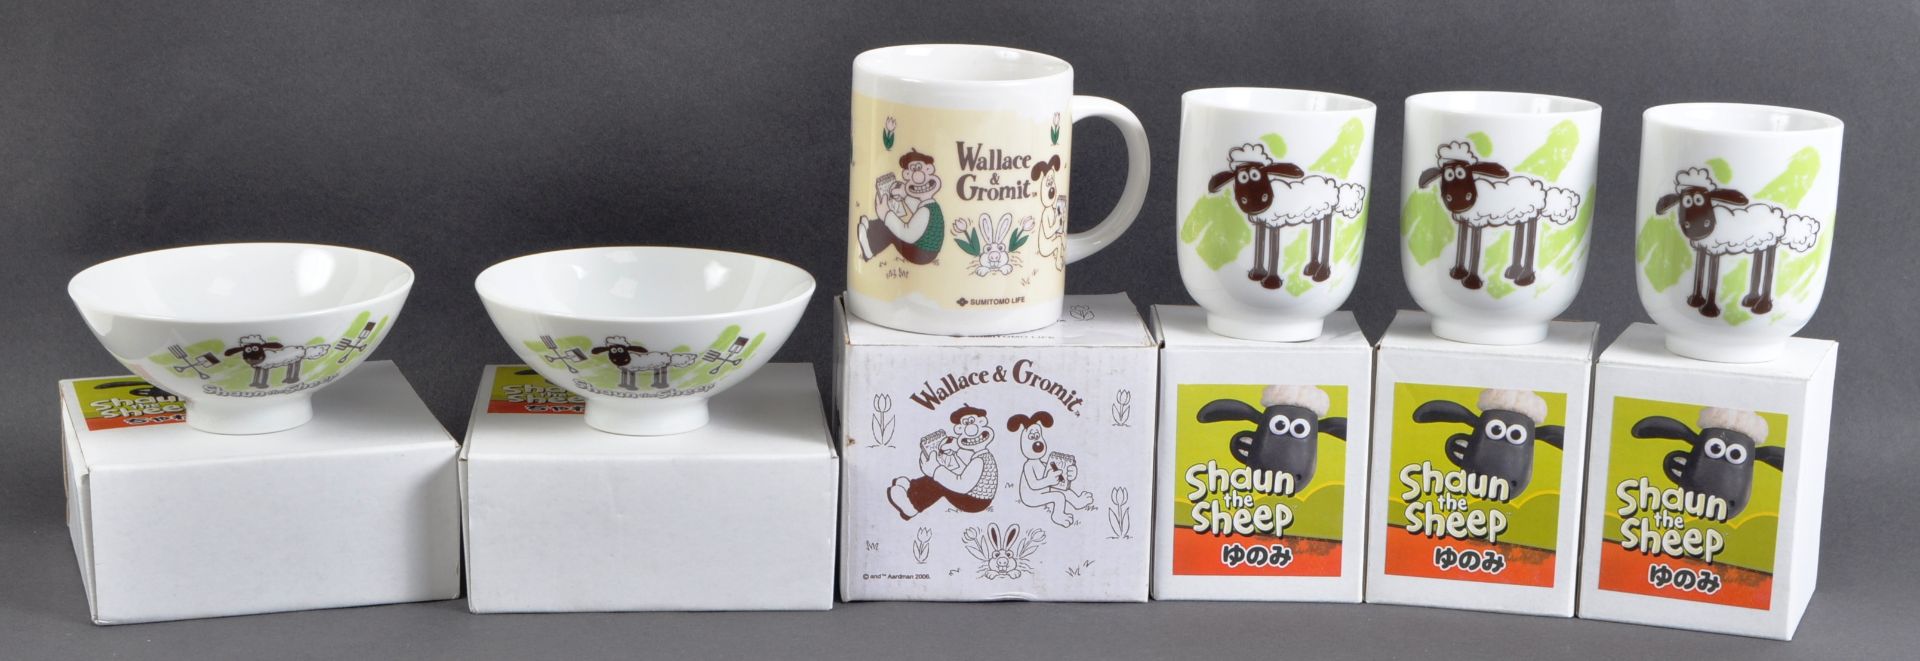 COLLECTION OF AARDMAN ANIMATIONS KITCHENWARE ITEMS